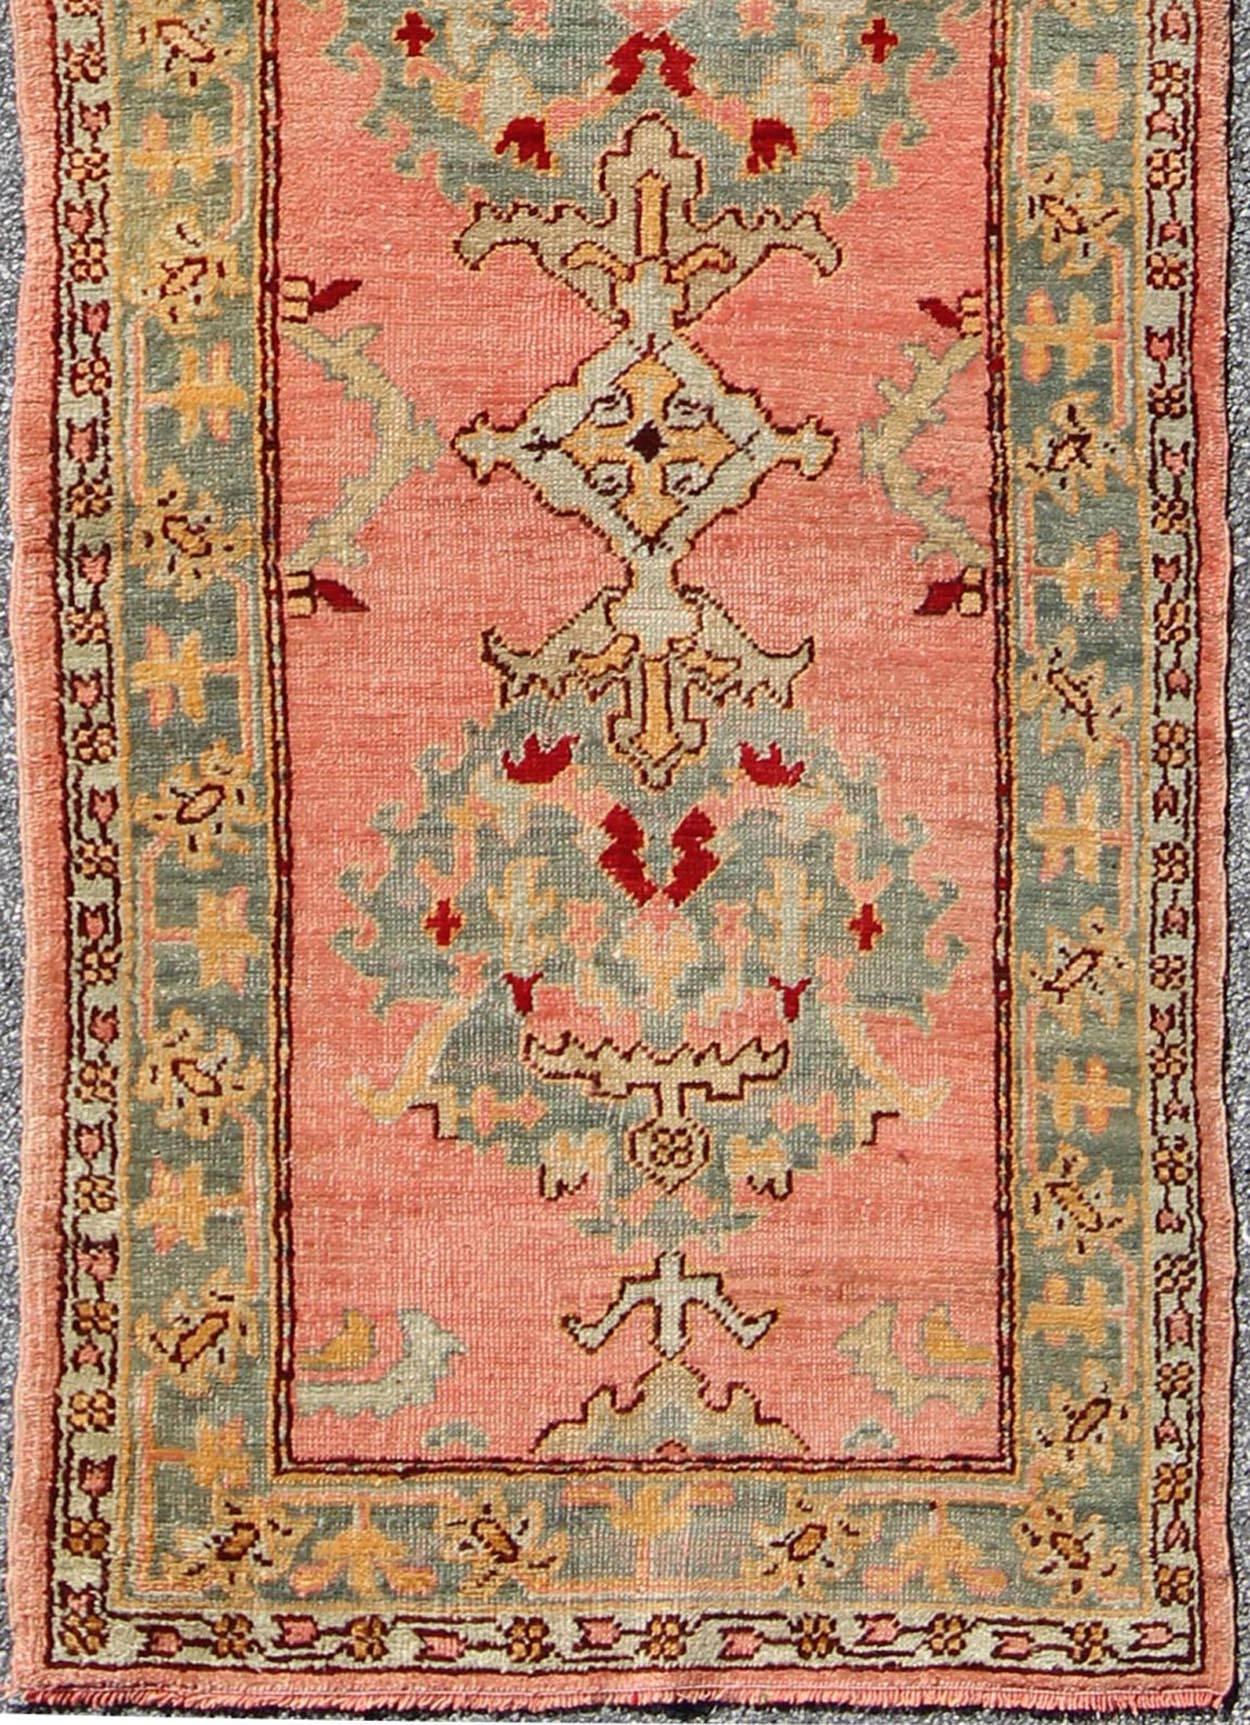 Early 20th century antique Turkish Oushak runner with medallions in coral background & green border, rug h8-0401, country of origin / type: Turkey / Oushak, circa 1920

This early 20th century antique Turkish Oushak runner displays beautiful